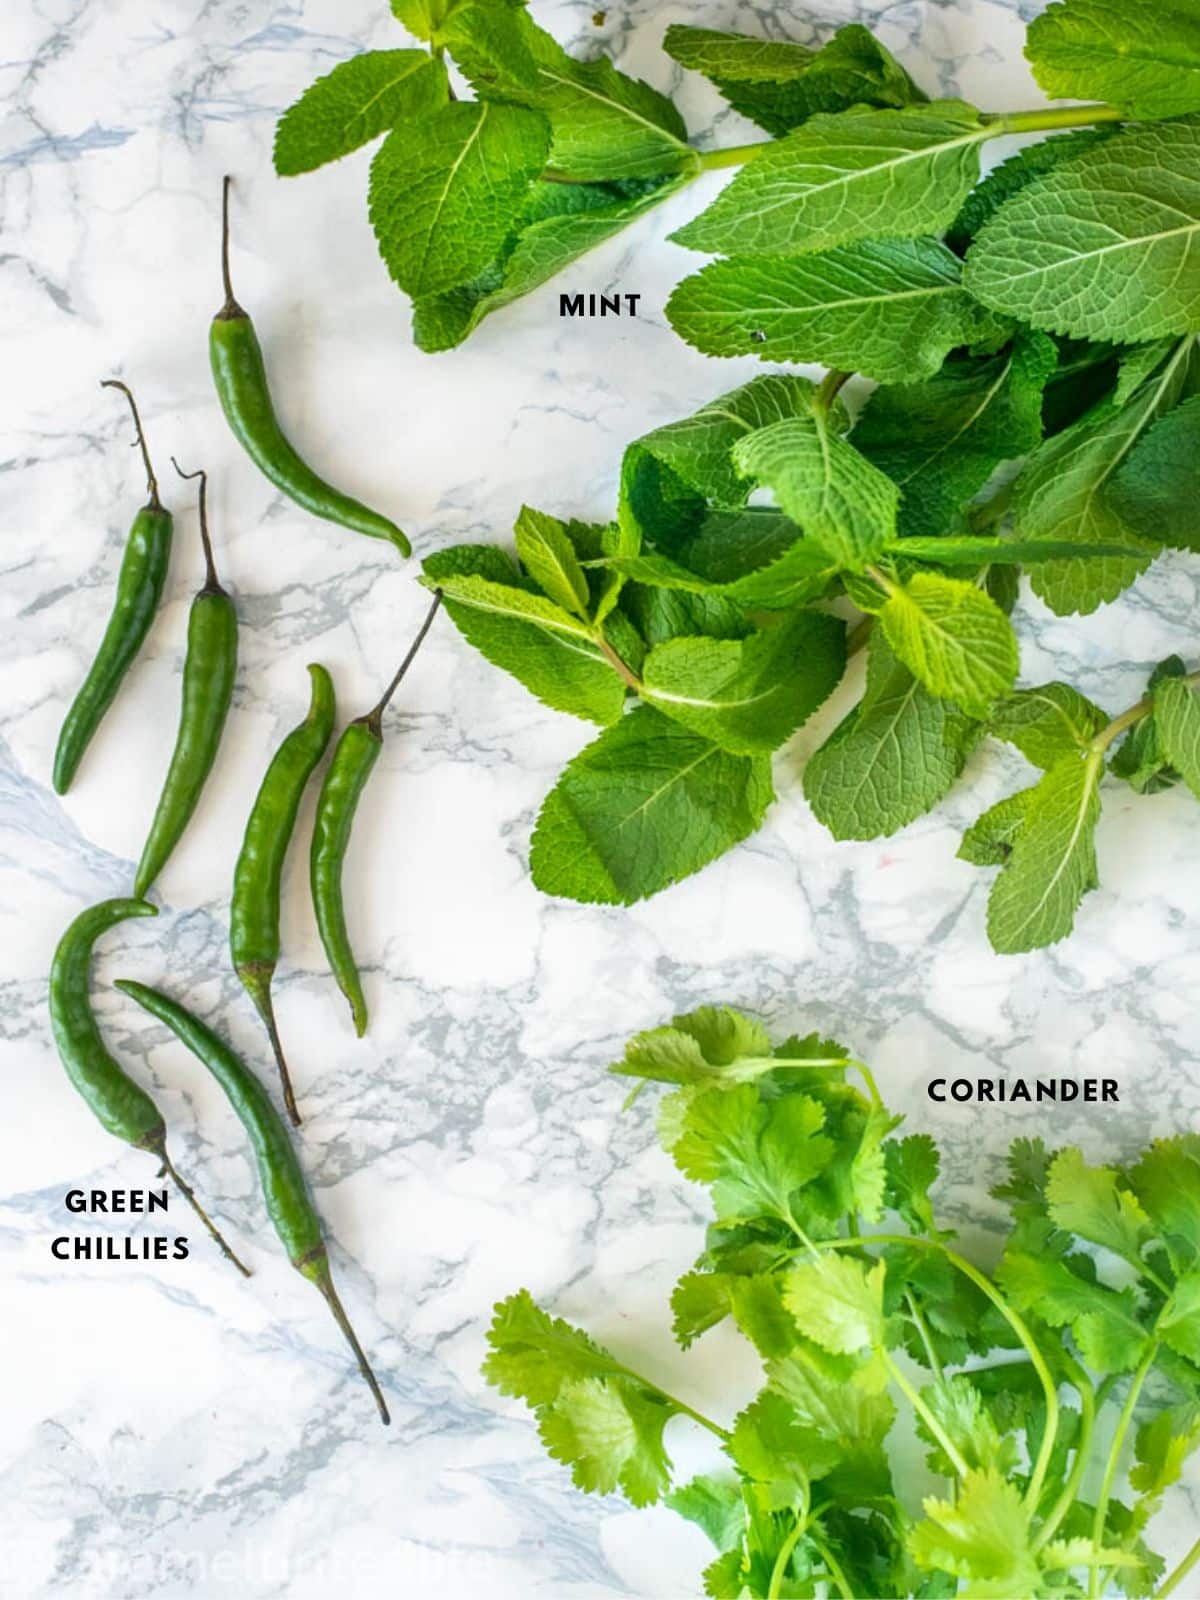 Fresh herbs in Indian cooking - Mint, coriander and green chilies